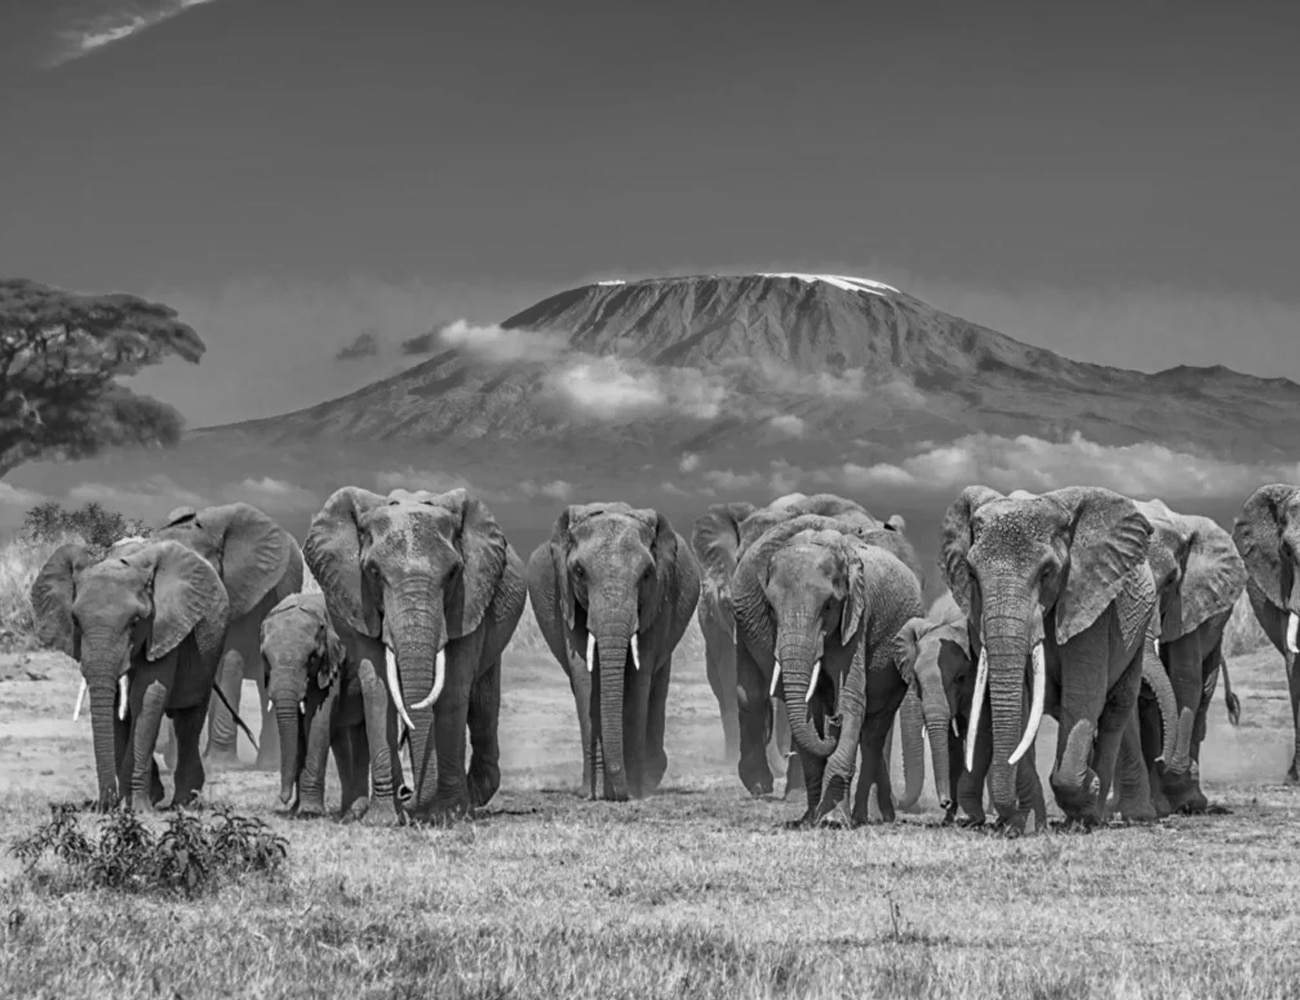 Wildlife and a View of Mount Kilimanjaro